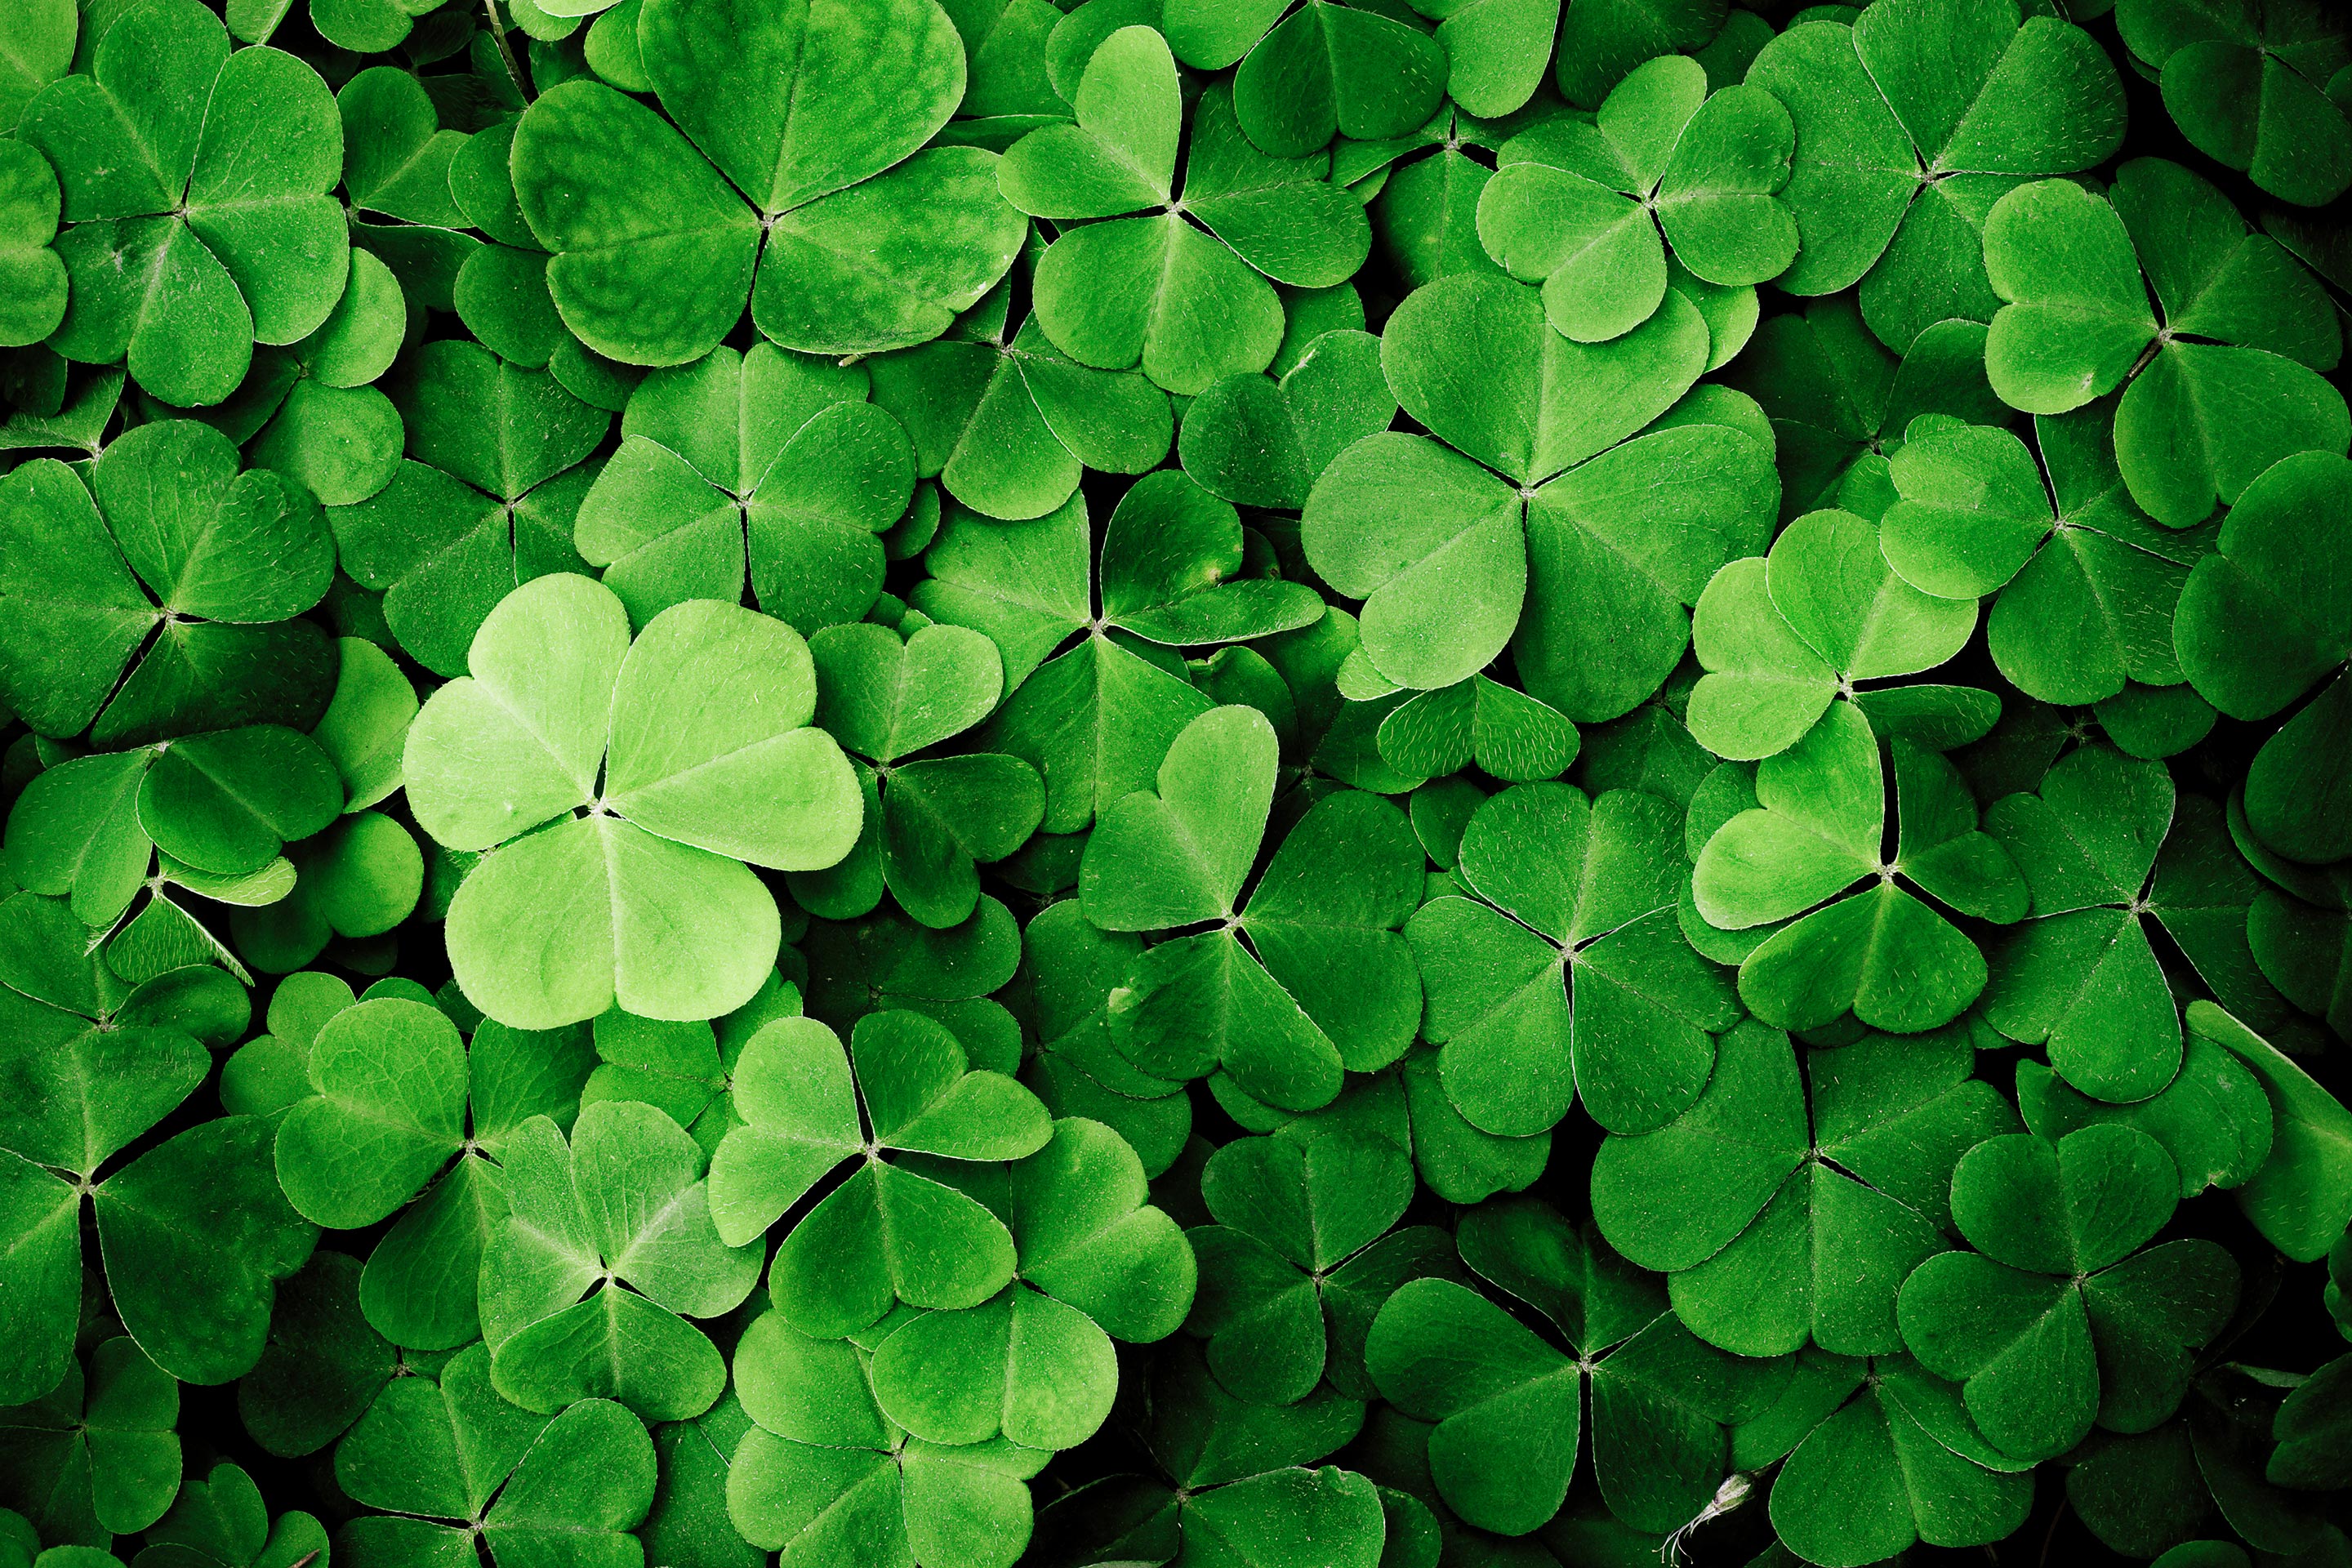 Overhead image of a group of clovers as a metaphor for creating a roadmap for financial goals